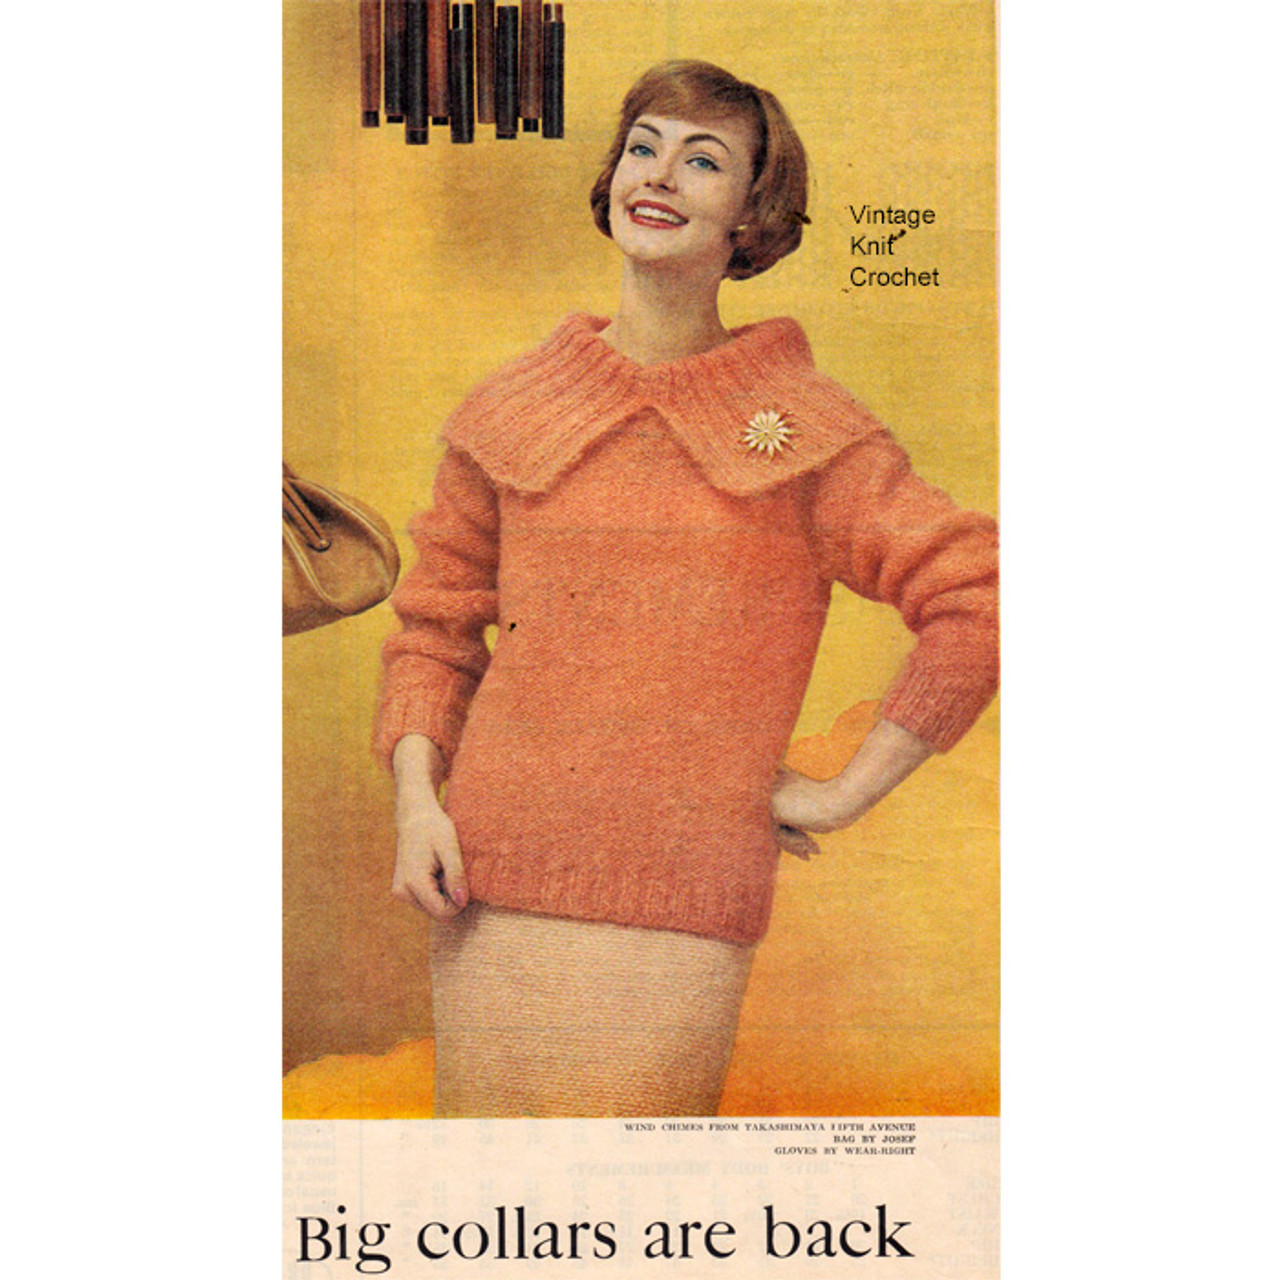 Big Collar Knitted Pullover pattern, Vintage 1959